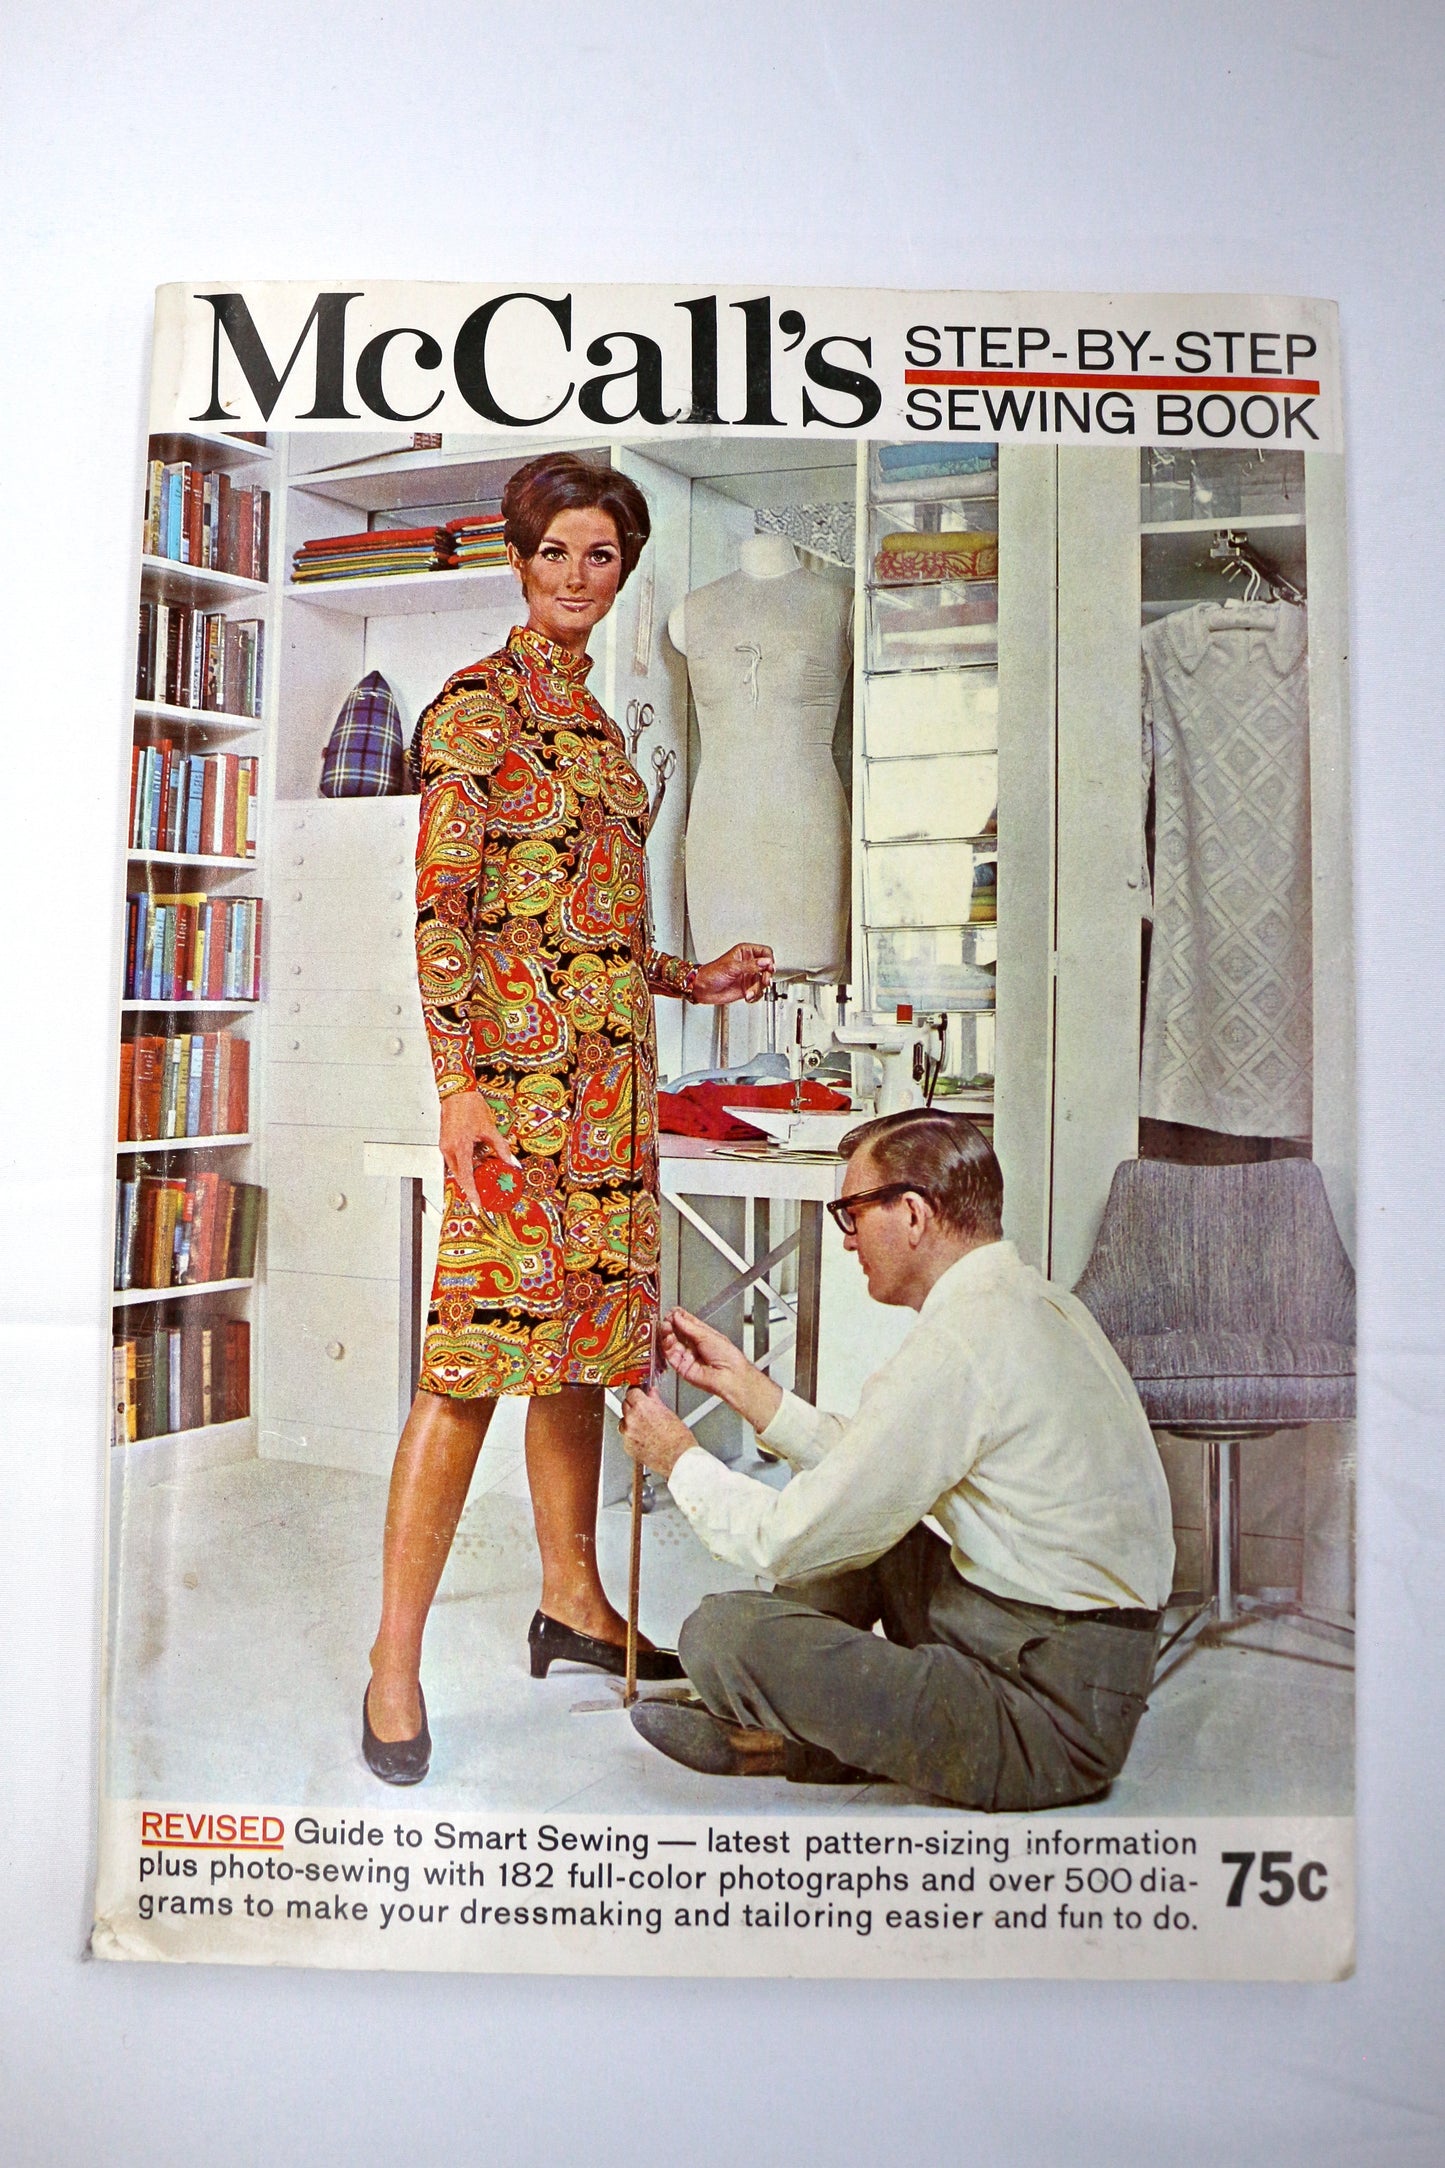 McCalls Step by Step Sewing Book